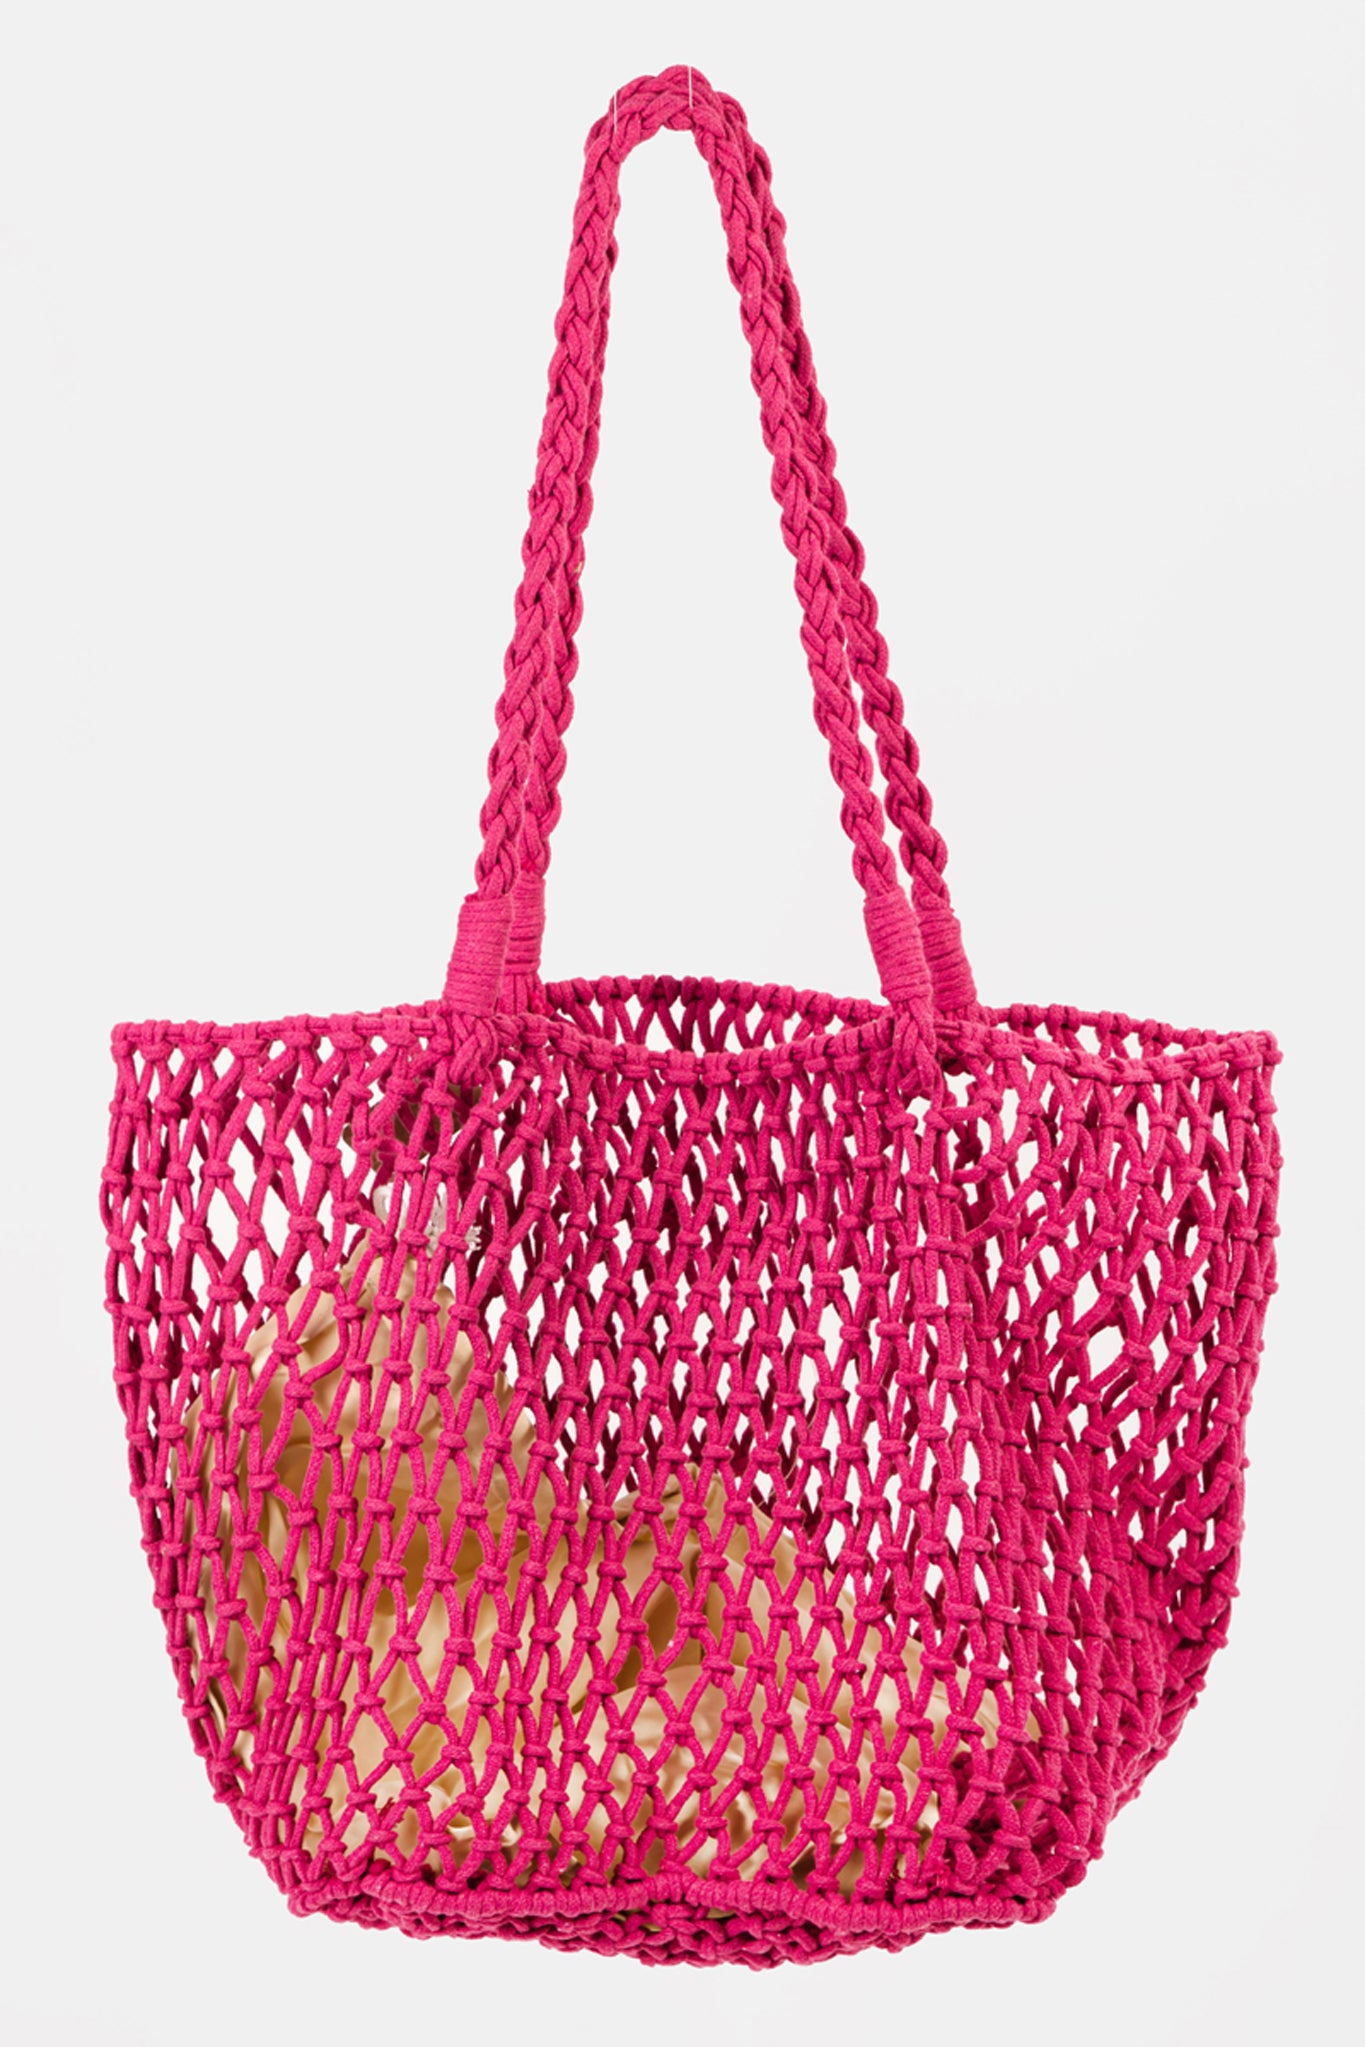 Mares Braided Net Tote Bag in Fuchsia